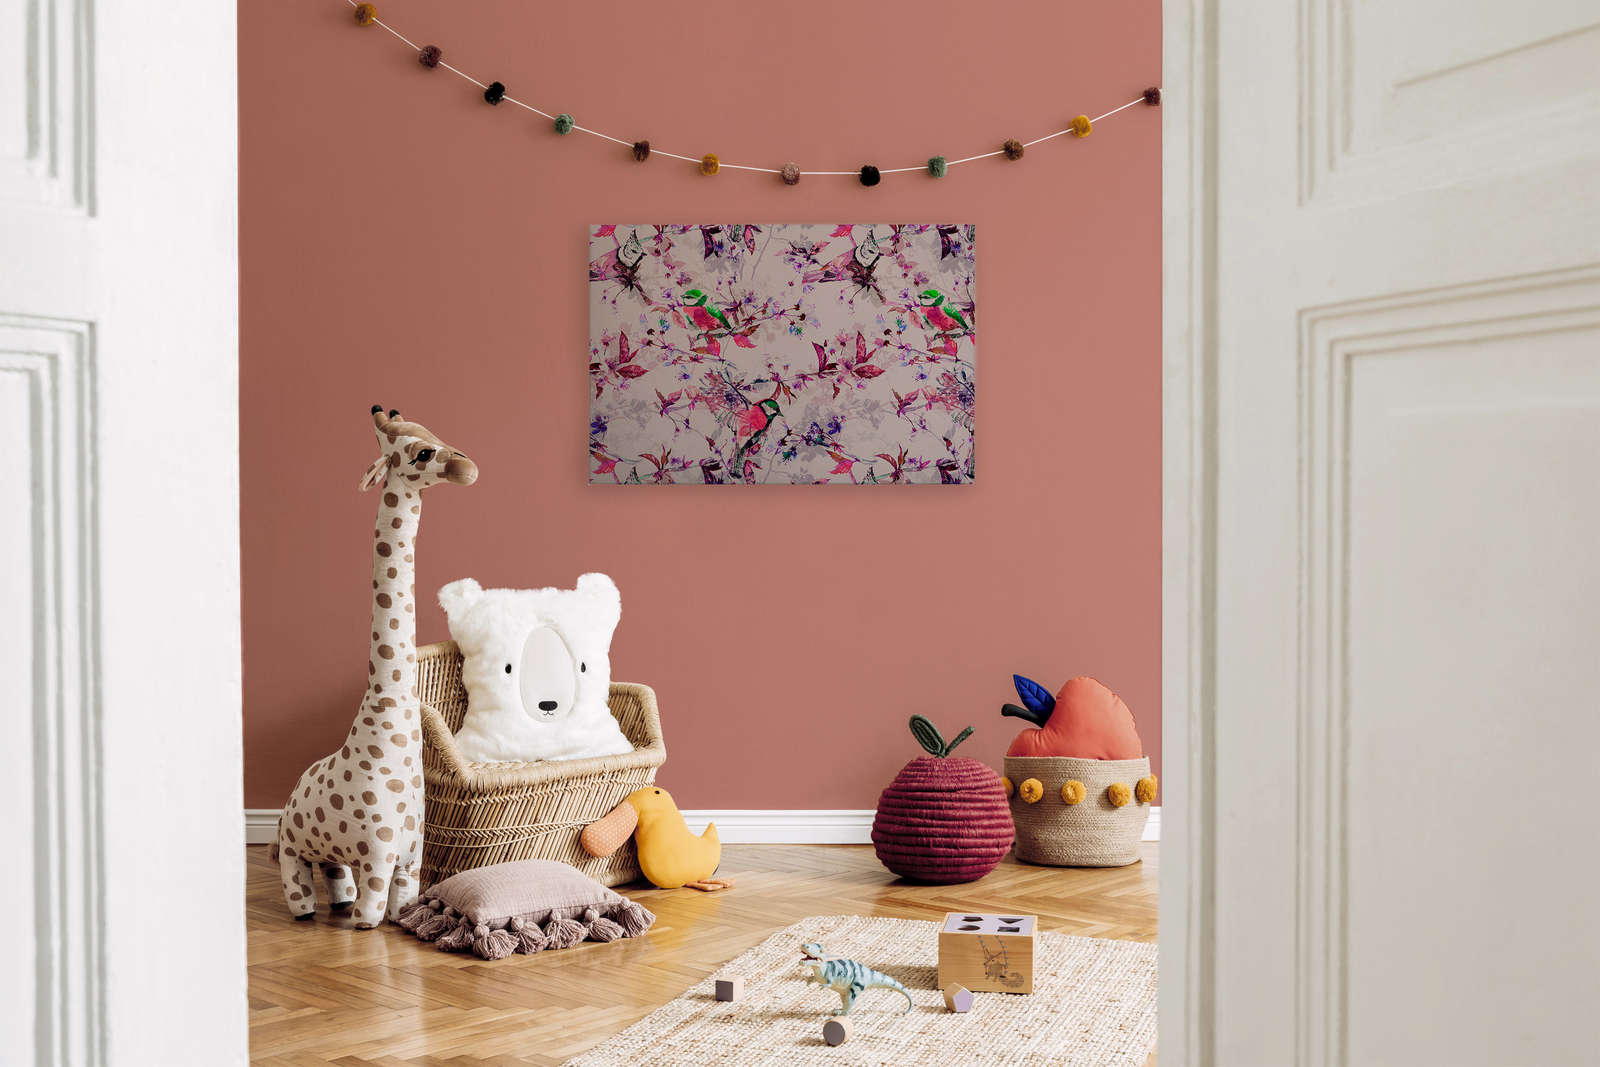             Birds Collage Style Canvas Painting | pink, blue - 0.90 m x 0.60 m
        